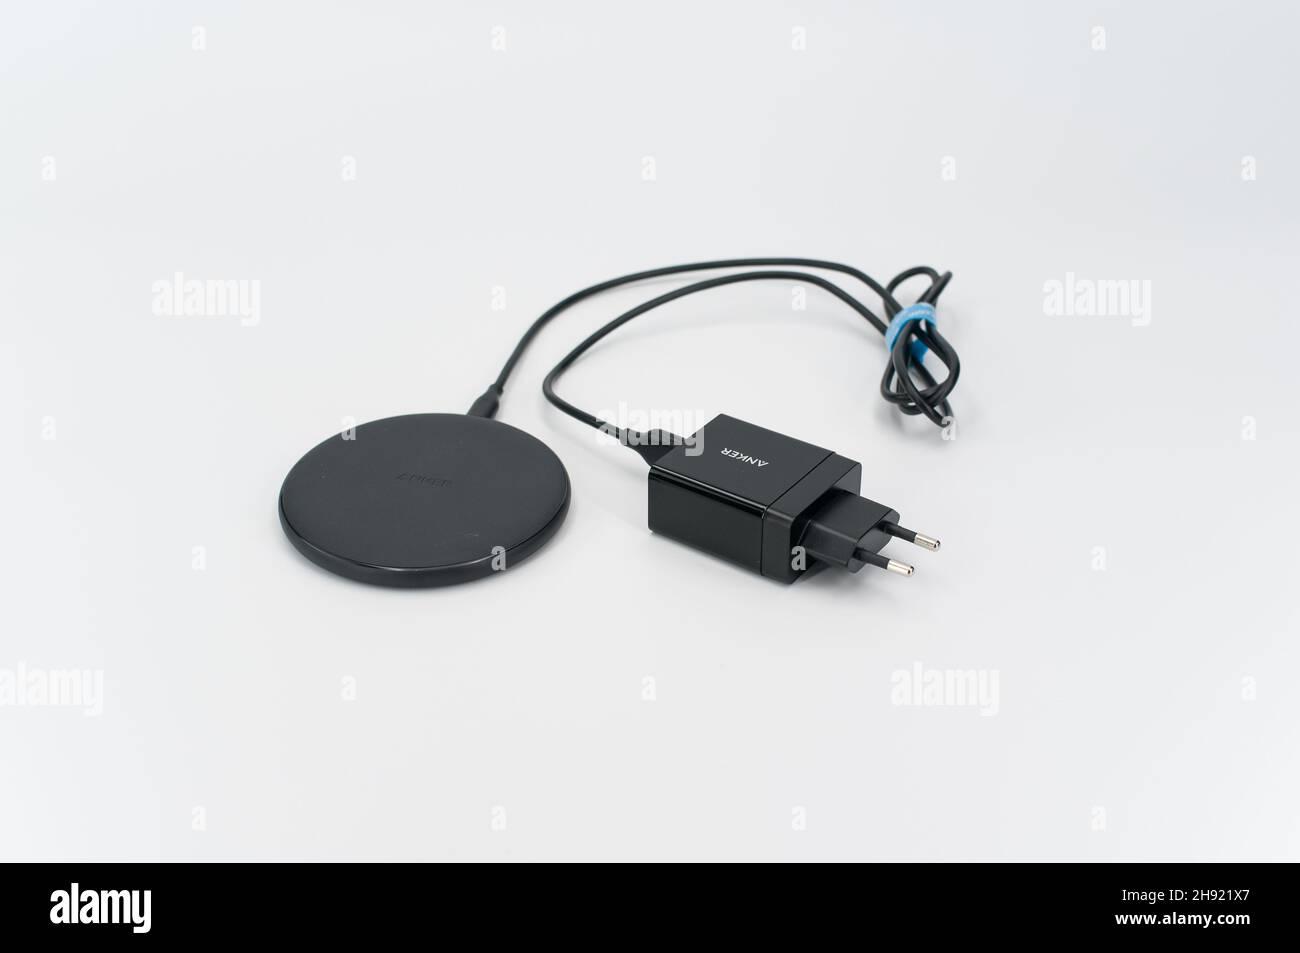 wireless smartphone charger on a white tabletop background Stock Photo